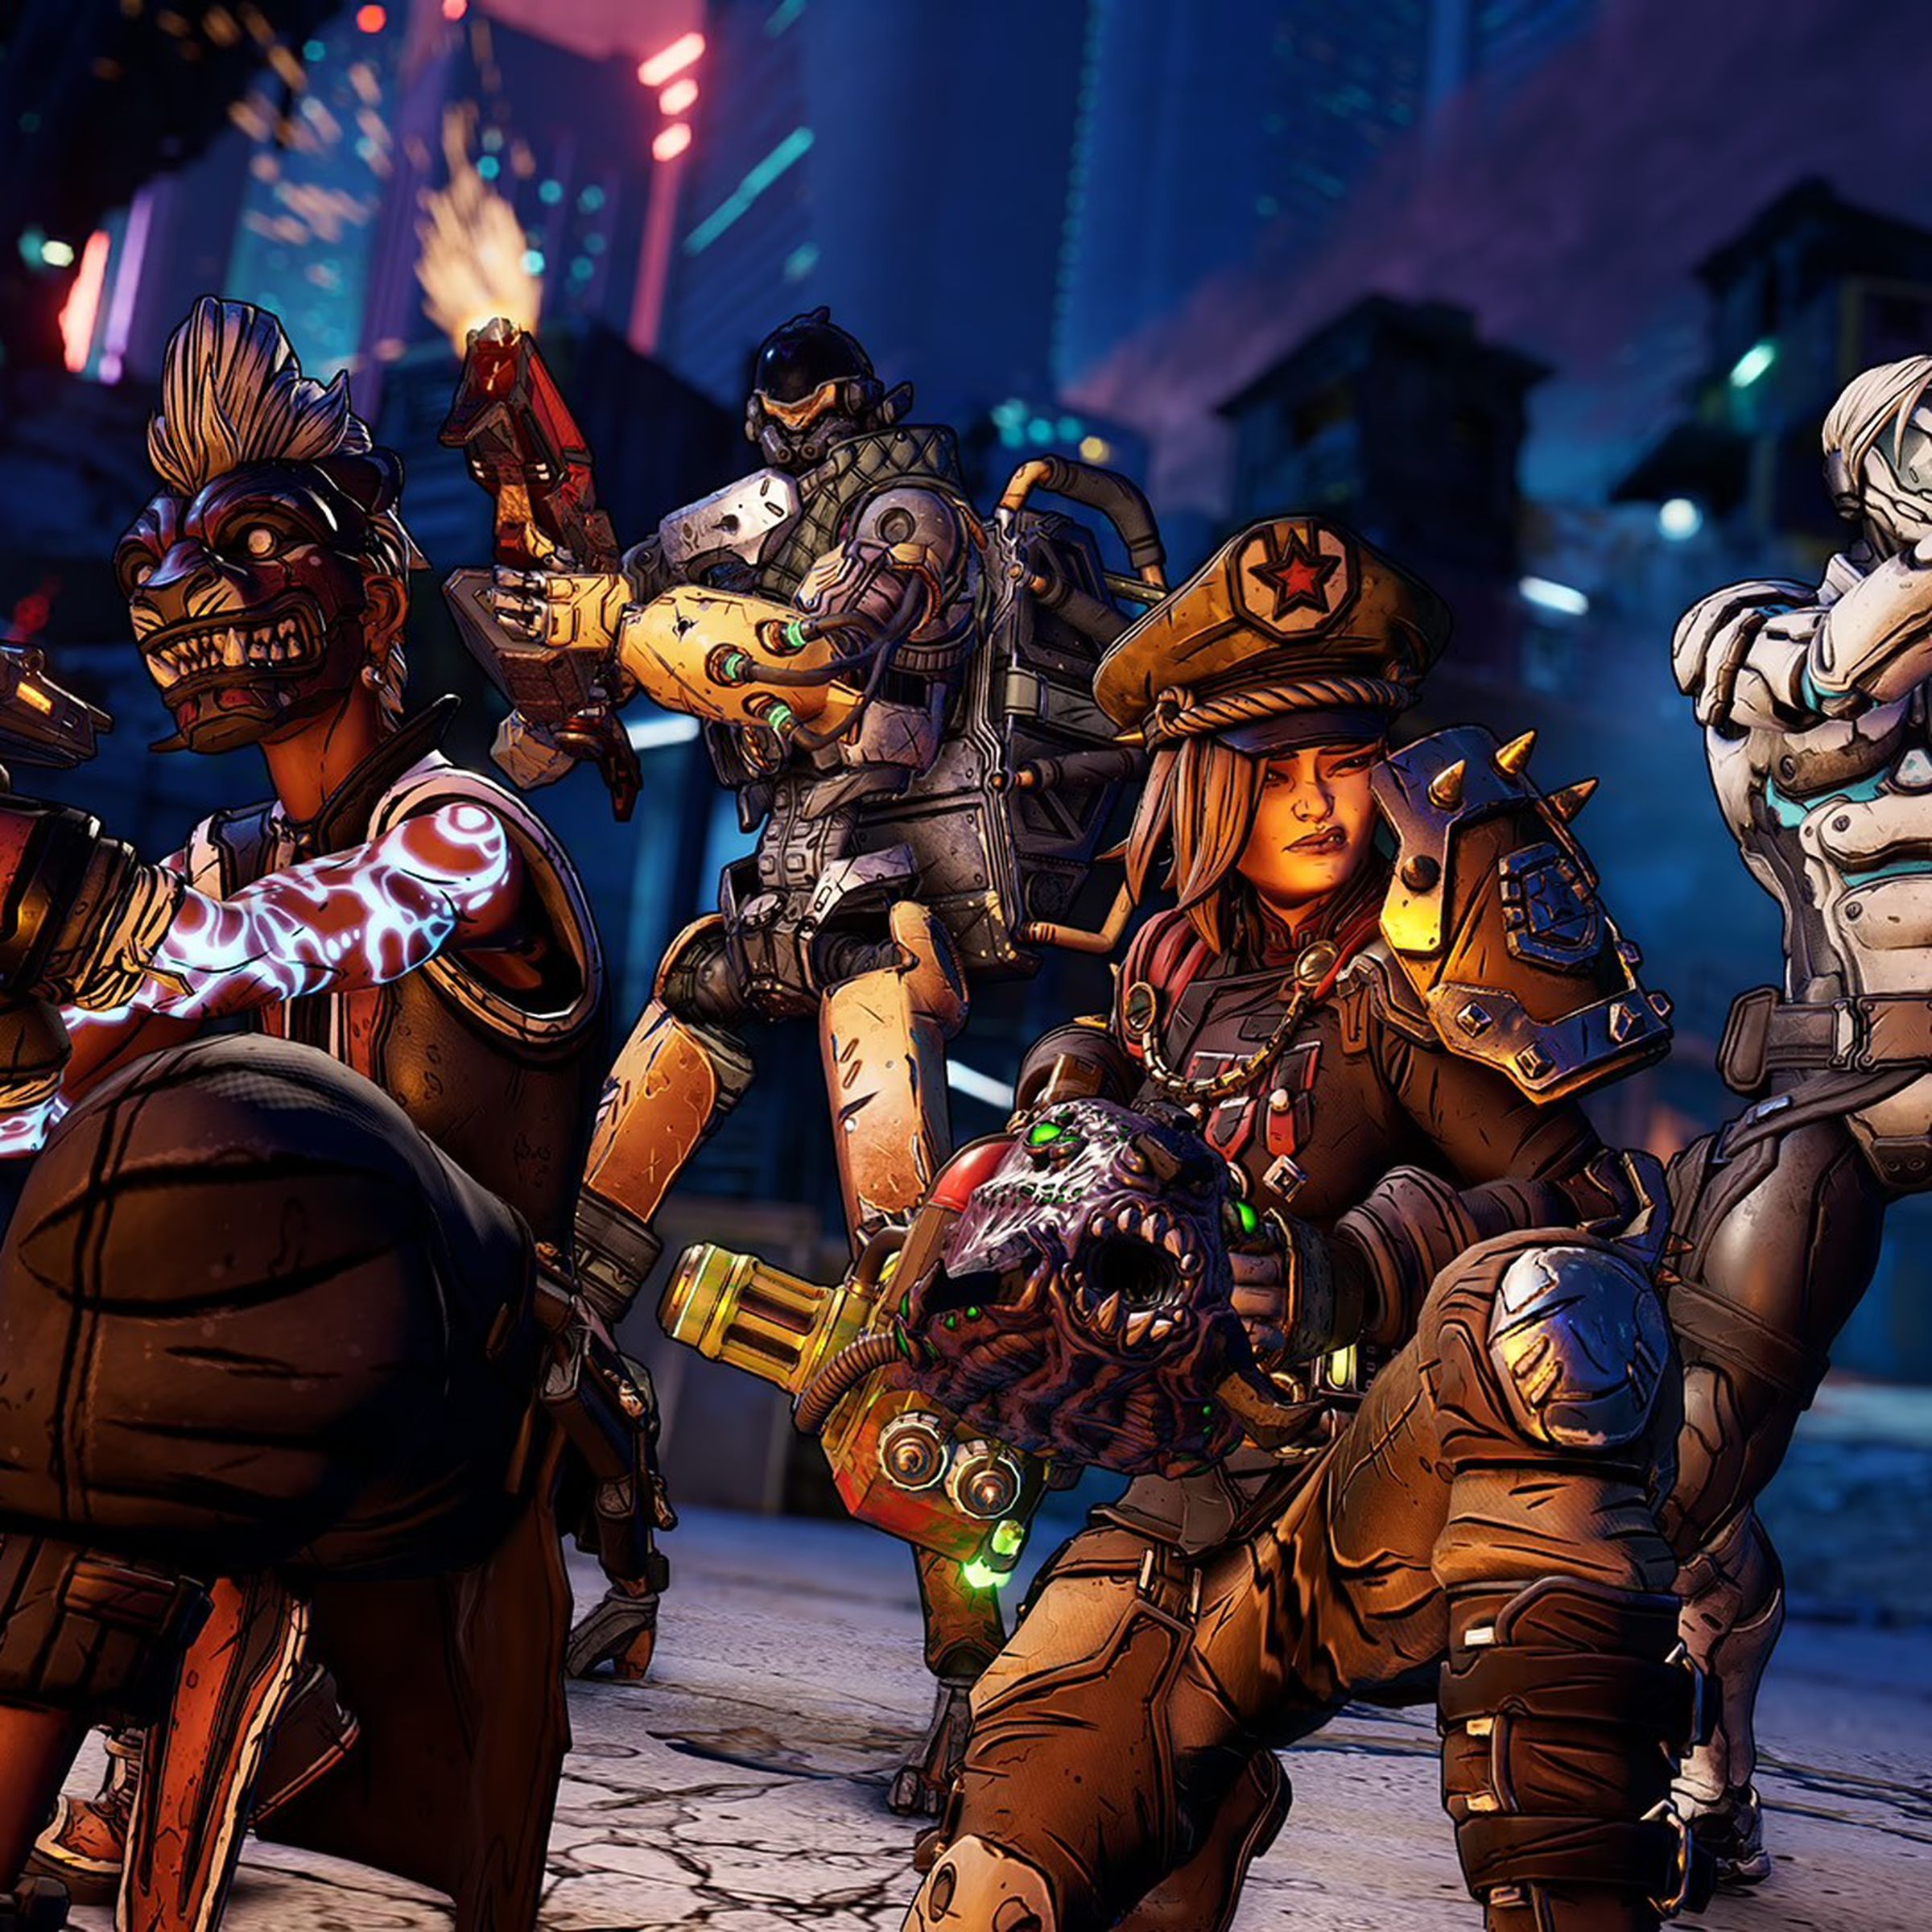 A screenshot from the game Borderlands 3, showing four gun-toting characters looking tough.